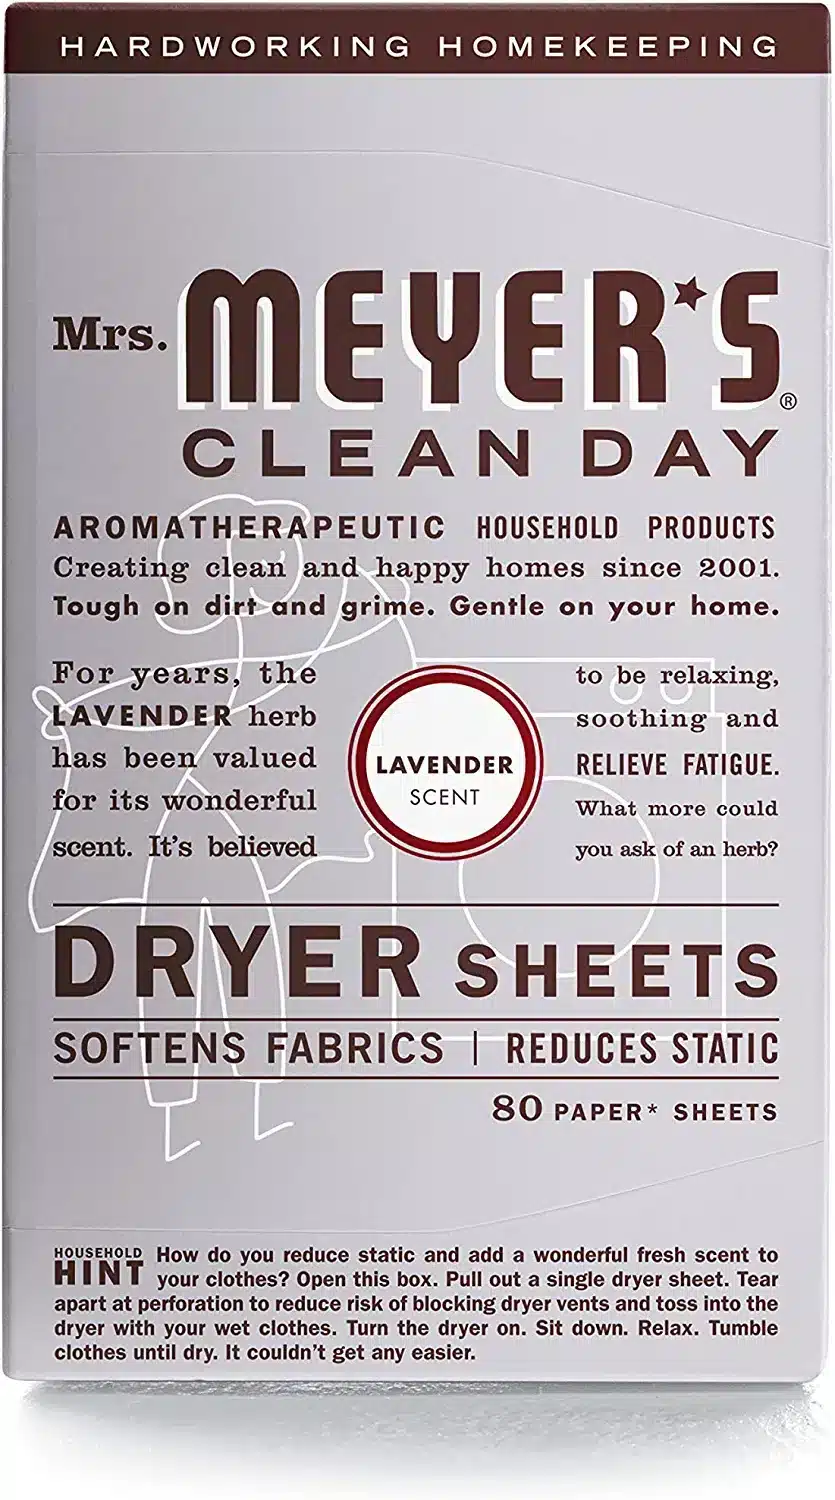 Are Dryer Sheets Safe?